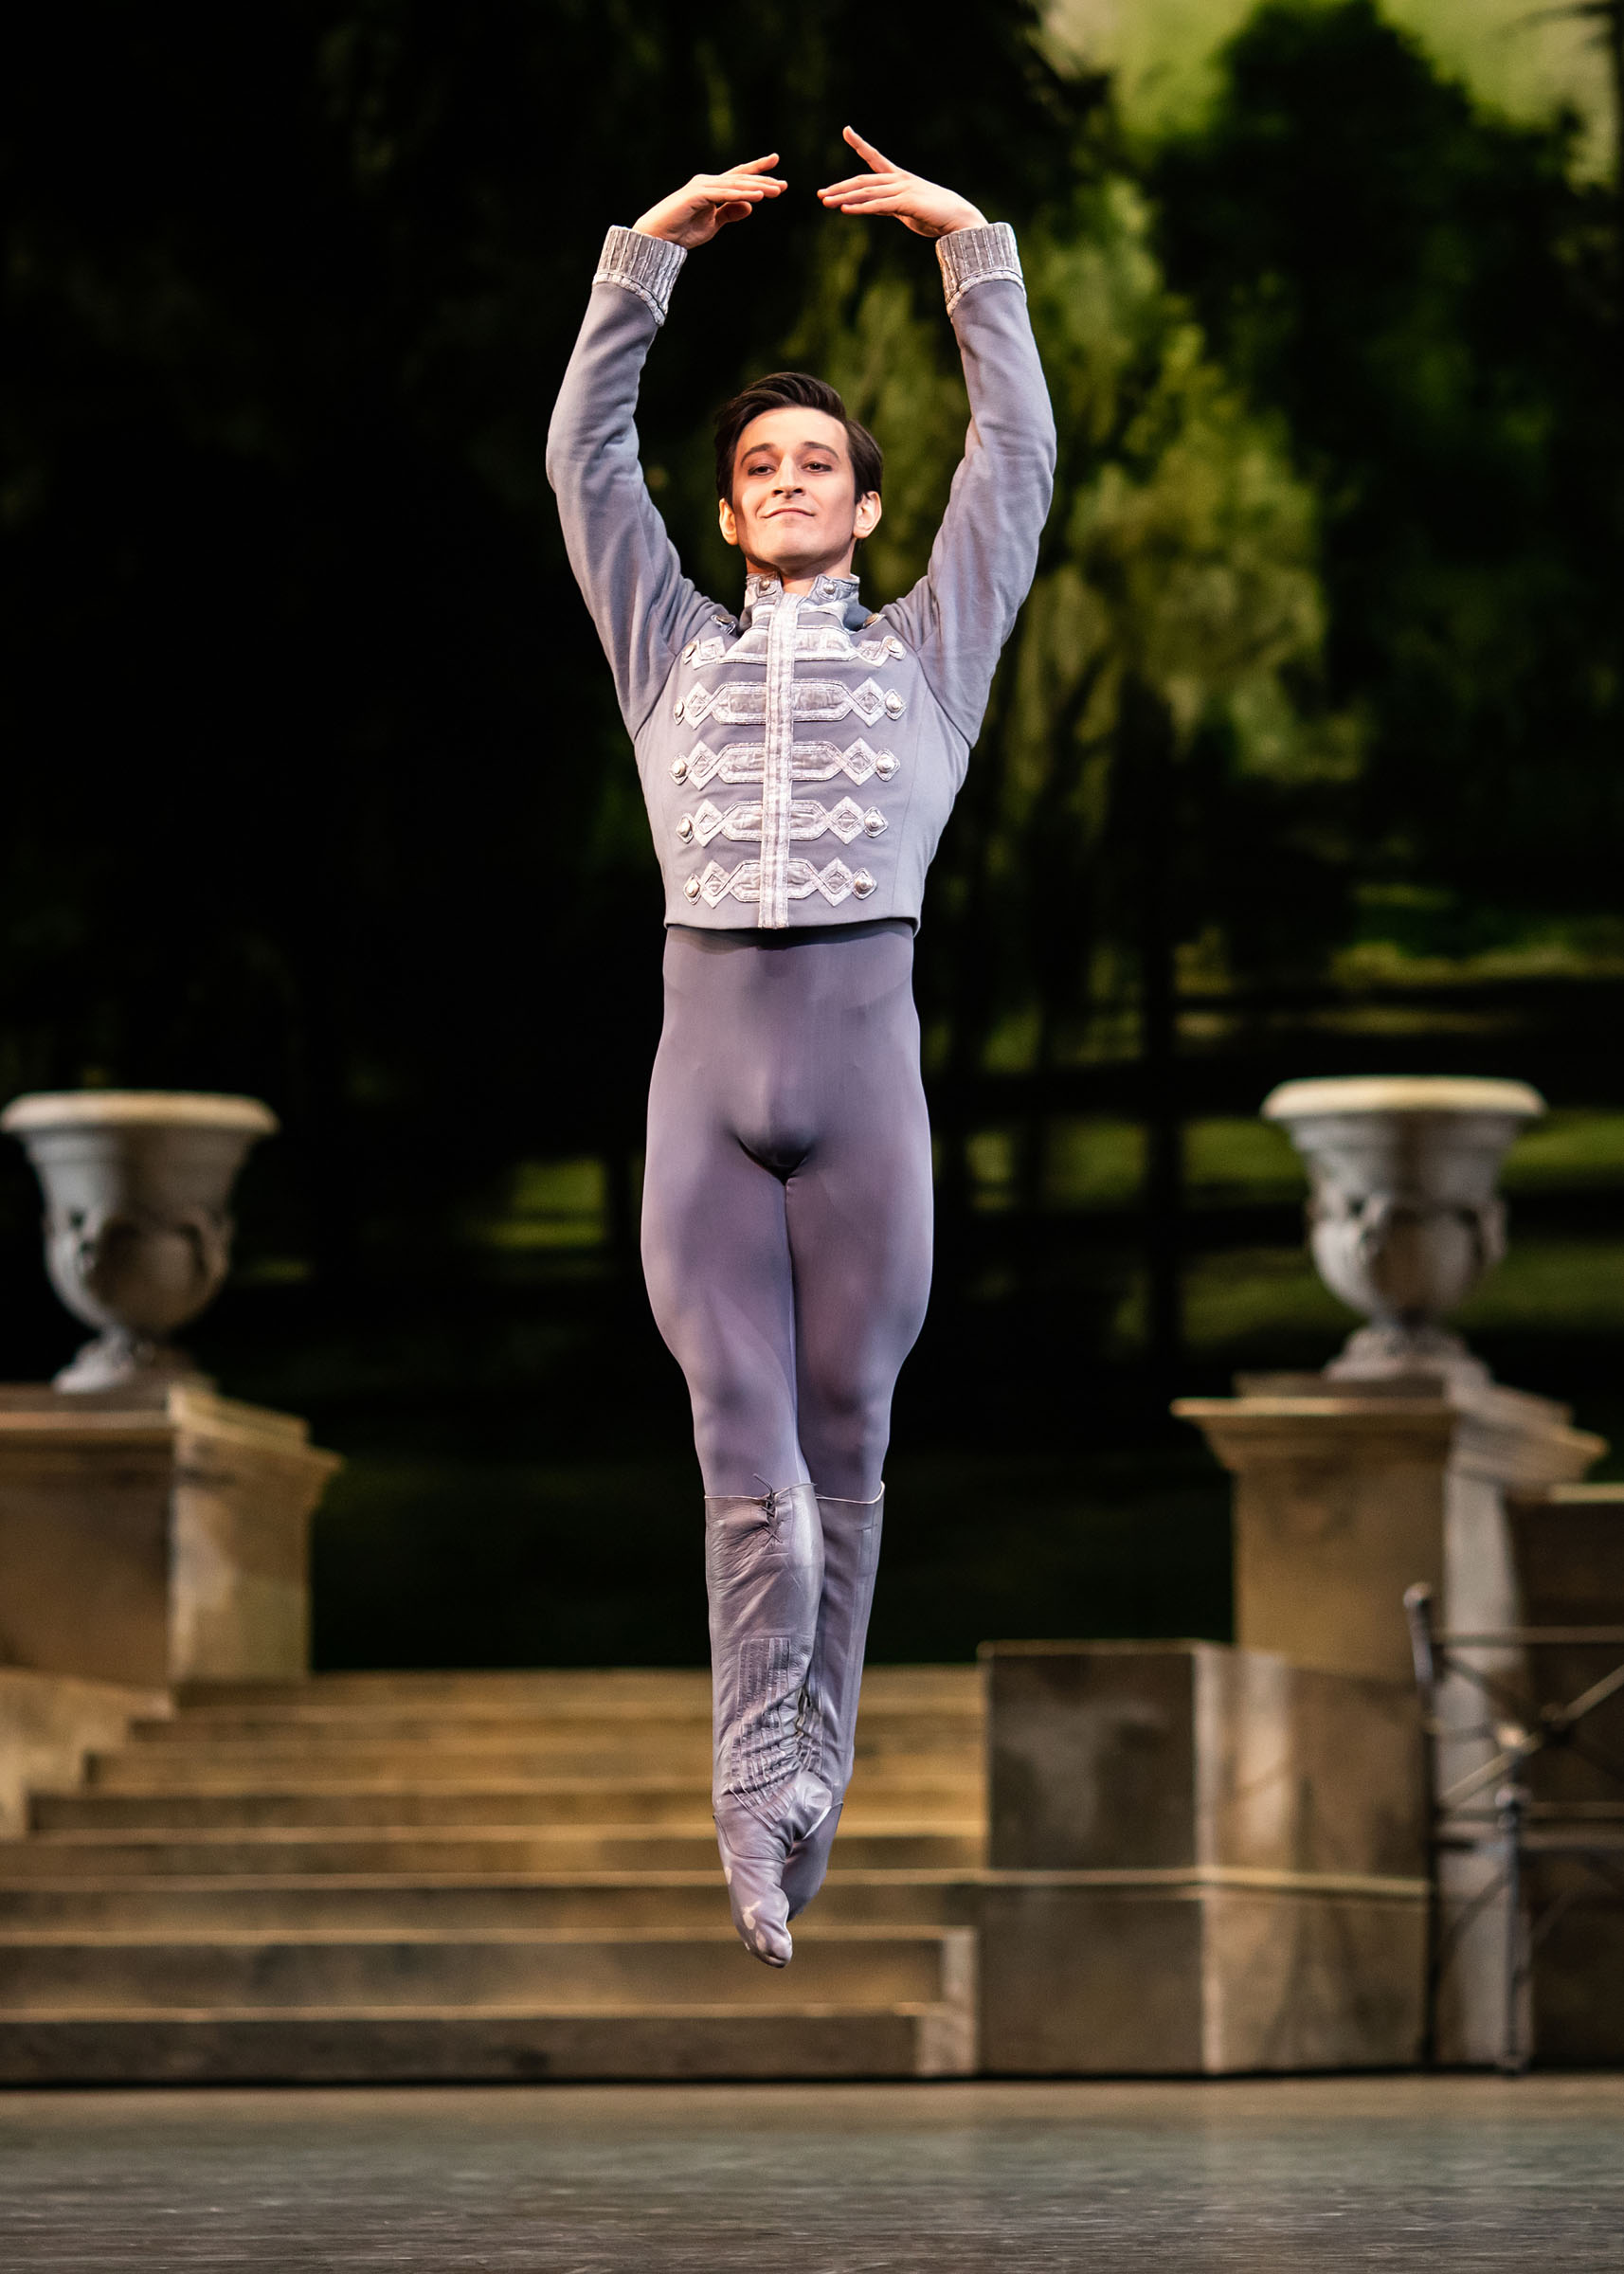 Valentino Zucchetti in the Royal Ballet's production of Swan Lake